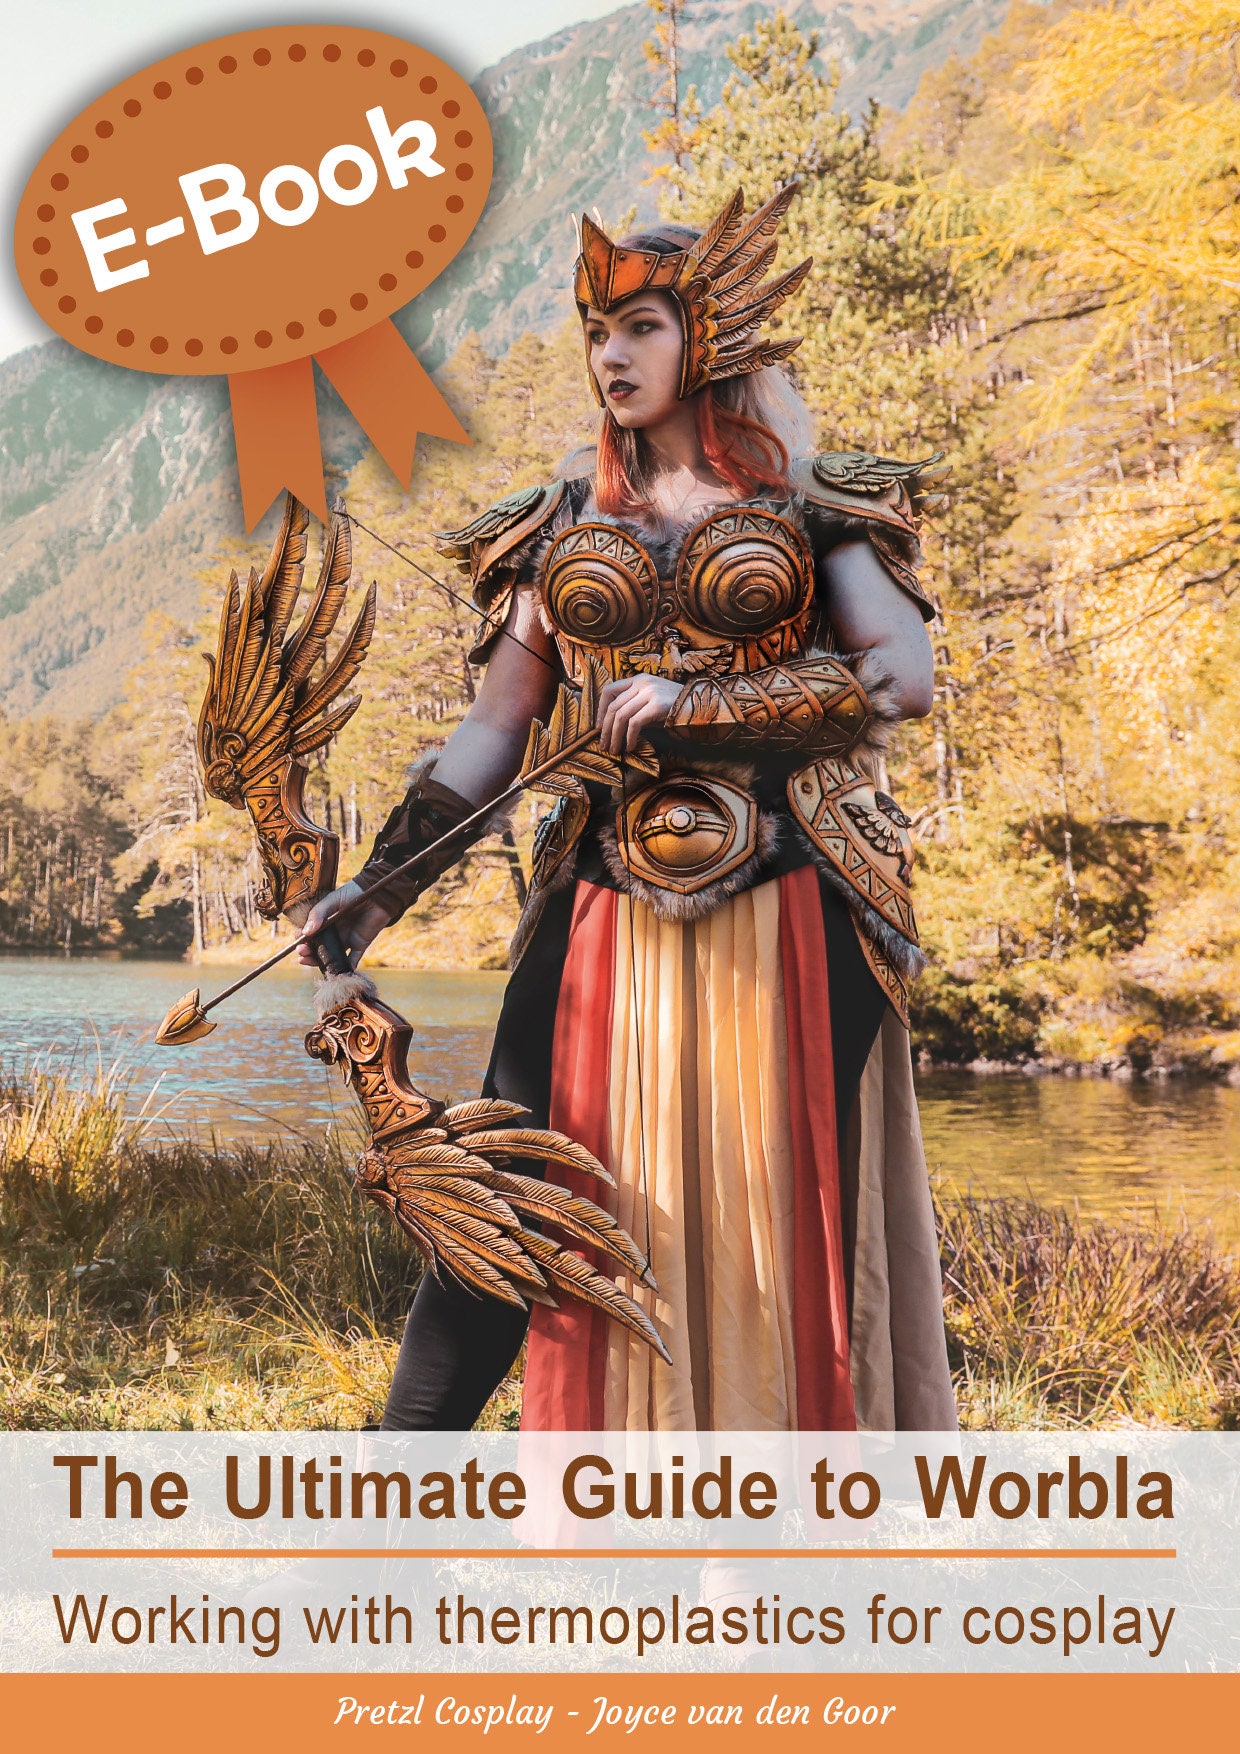 The Ultimate Guide to Foam - Print version and/or PDF - Pretzl Cosplay